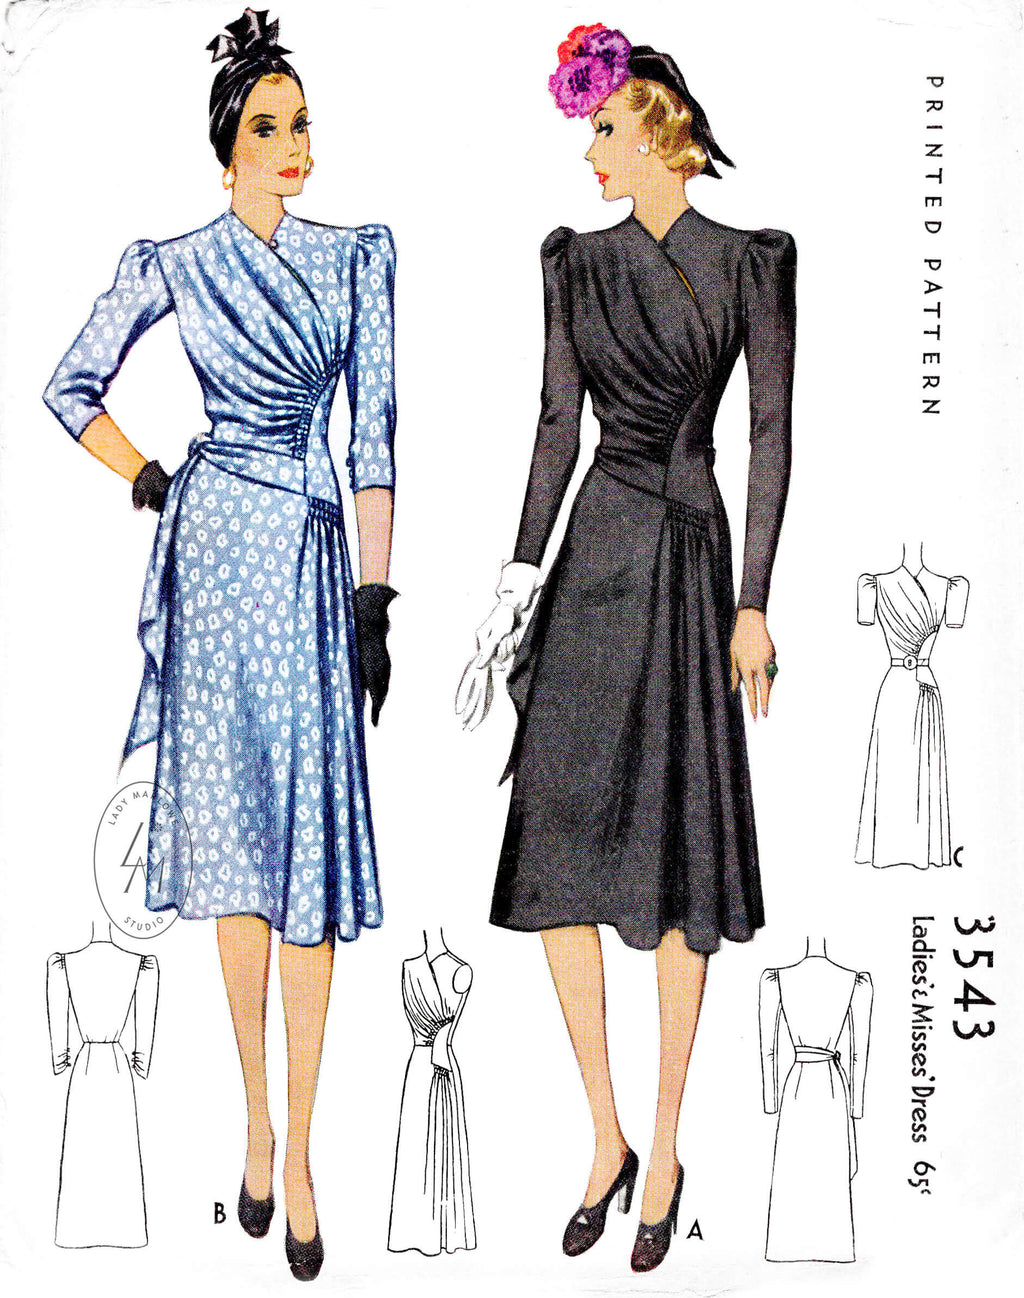 McCall 3543 1939 1940s dress vintage sewing pattern